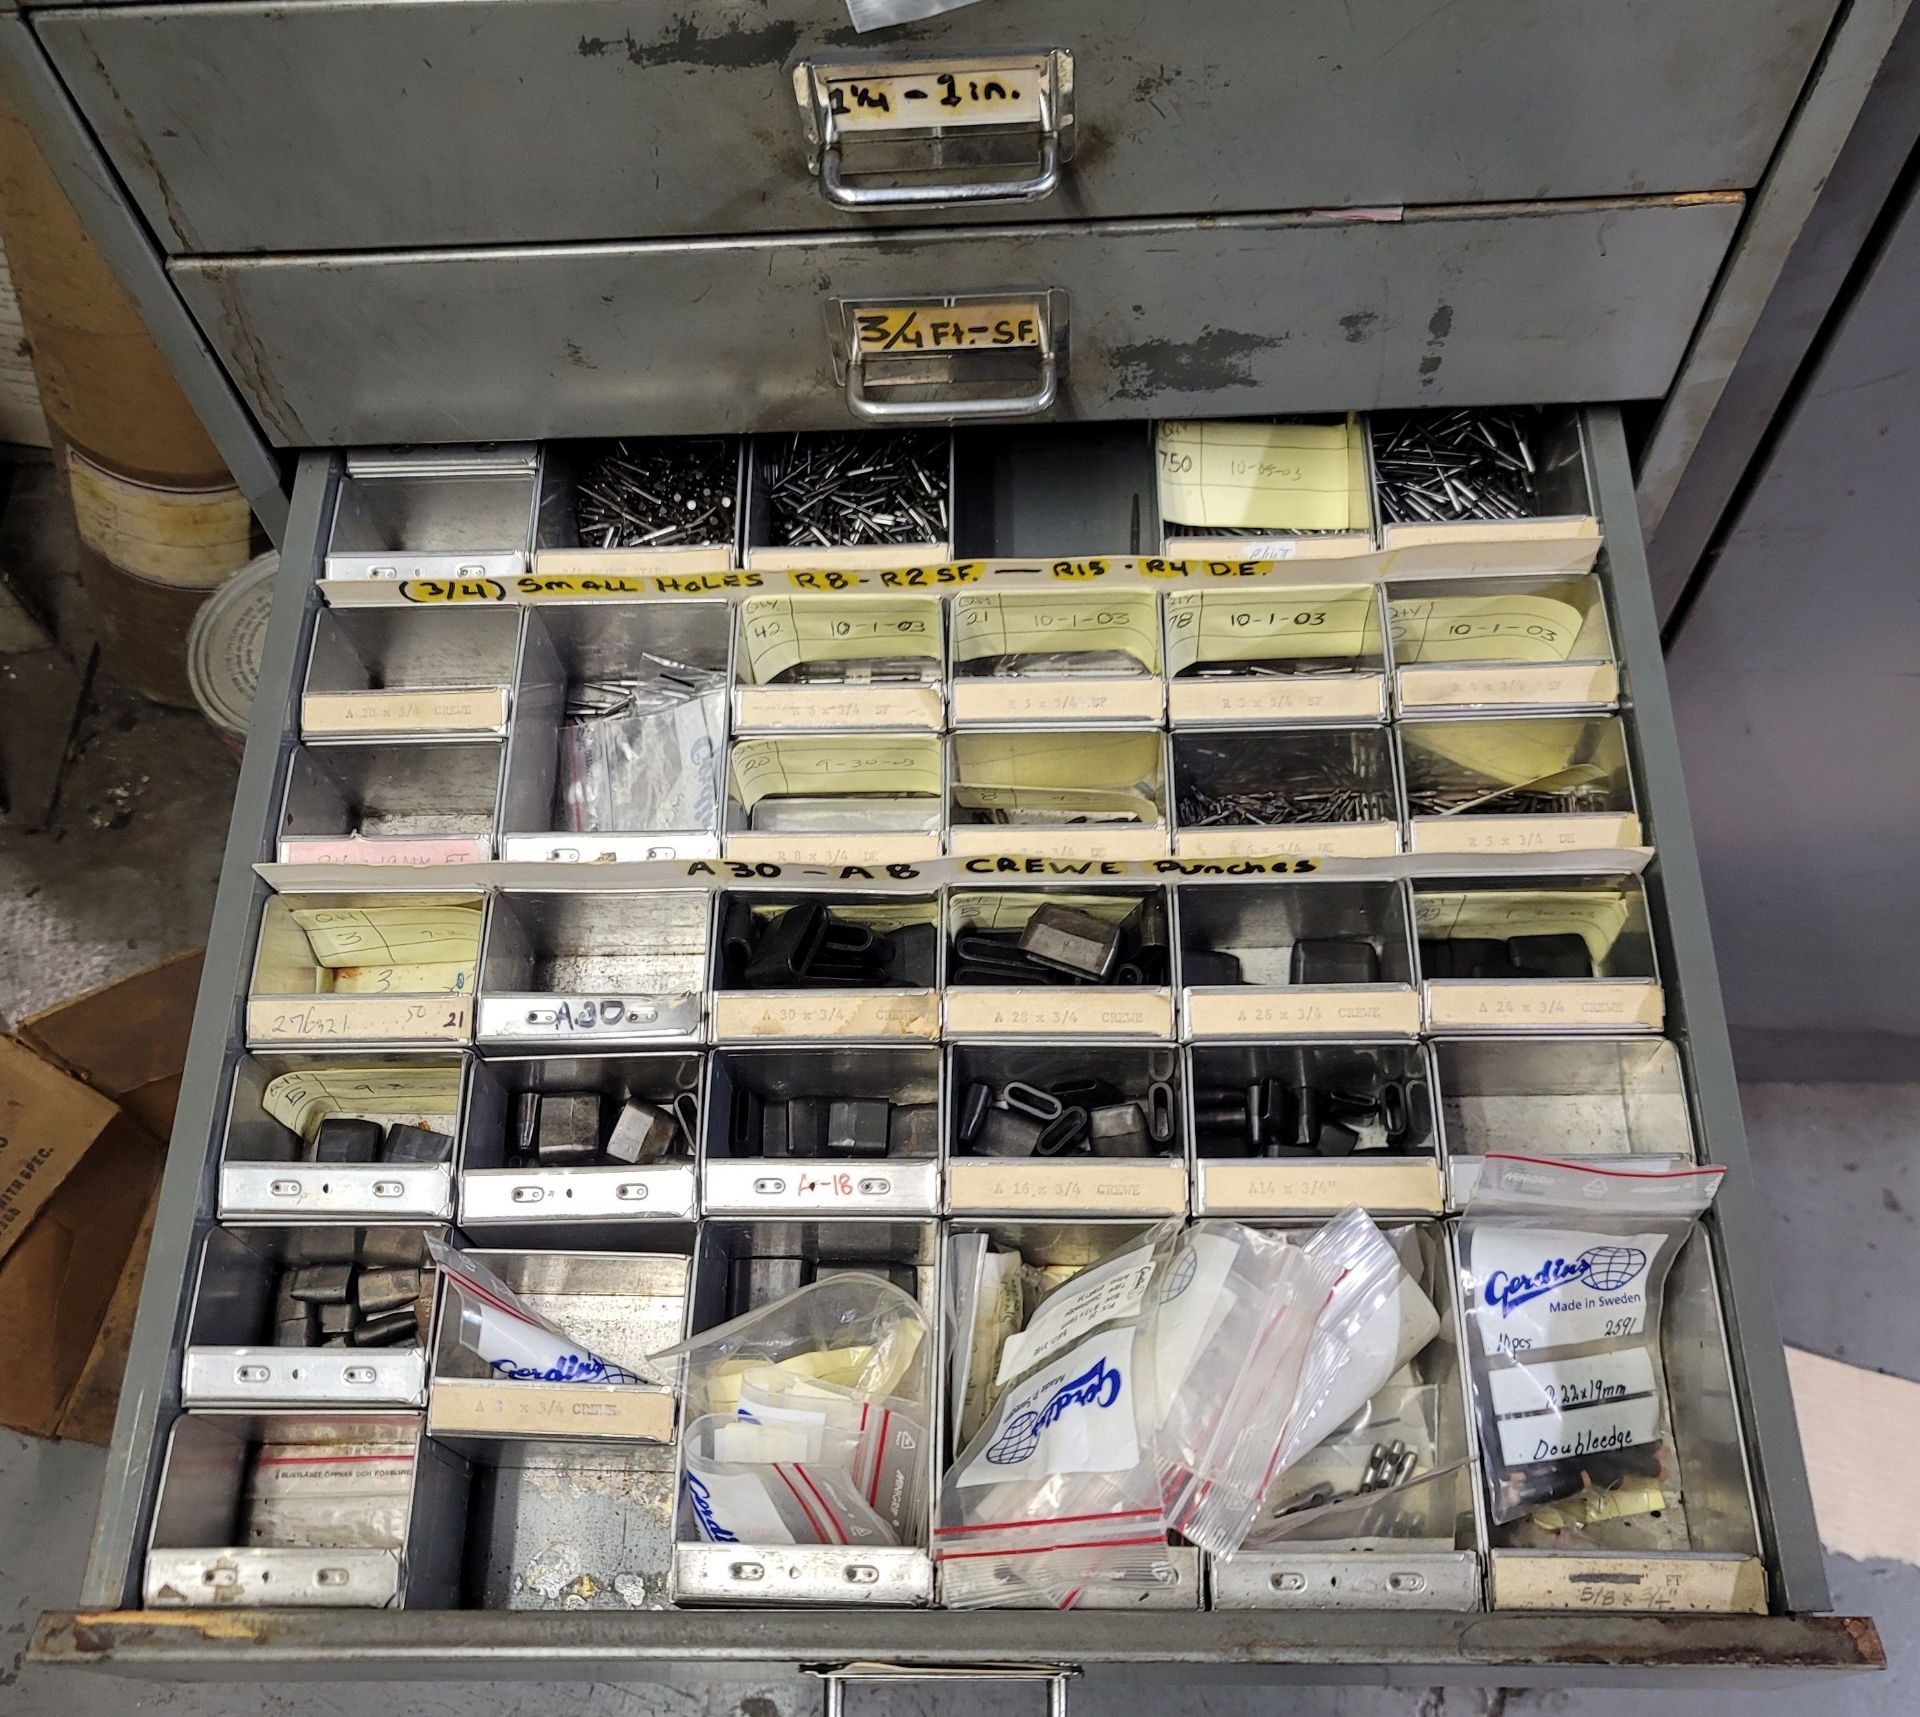 LOT - CABINET, W/ CONTENTS AND ITEMS ON TOP, FEED THRU PUNCHES - Image 6 of 7